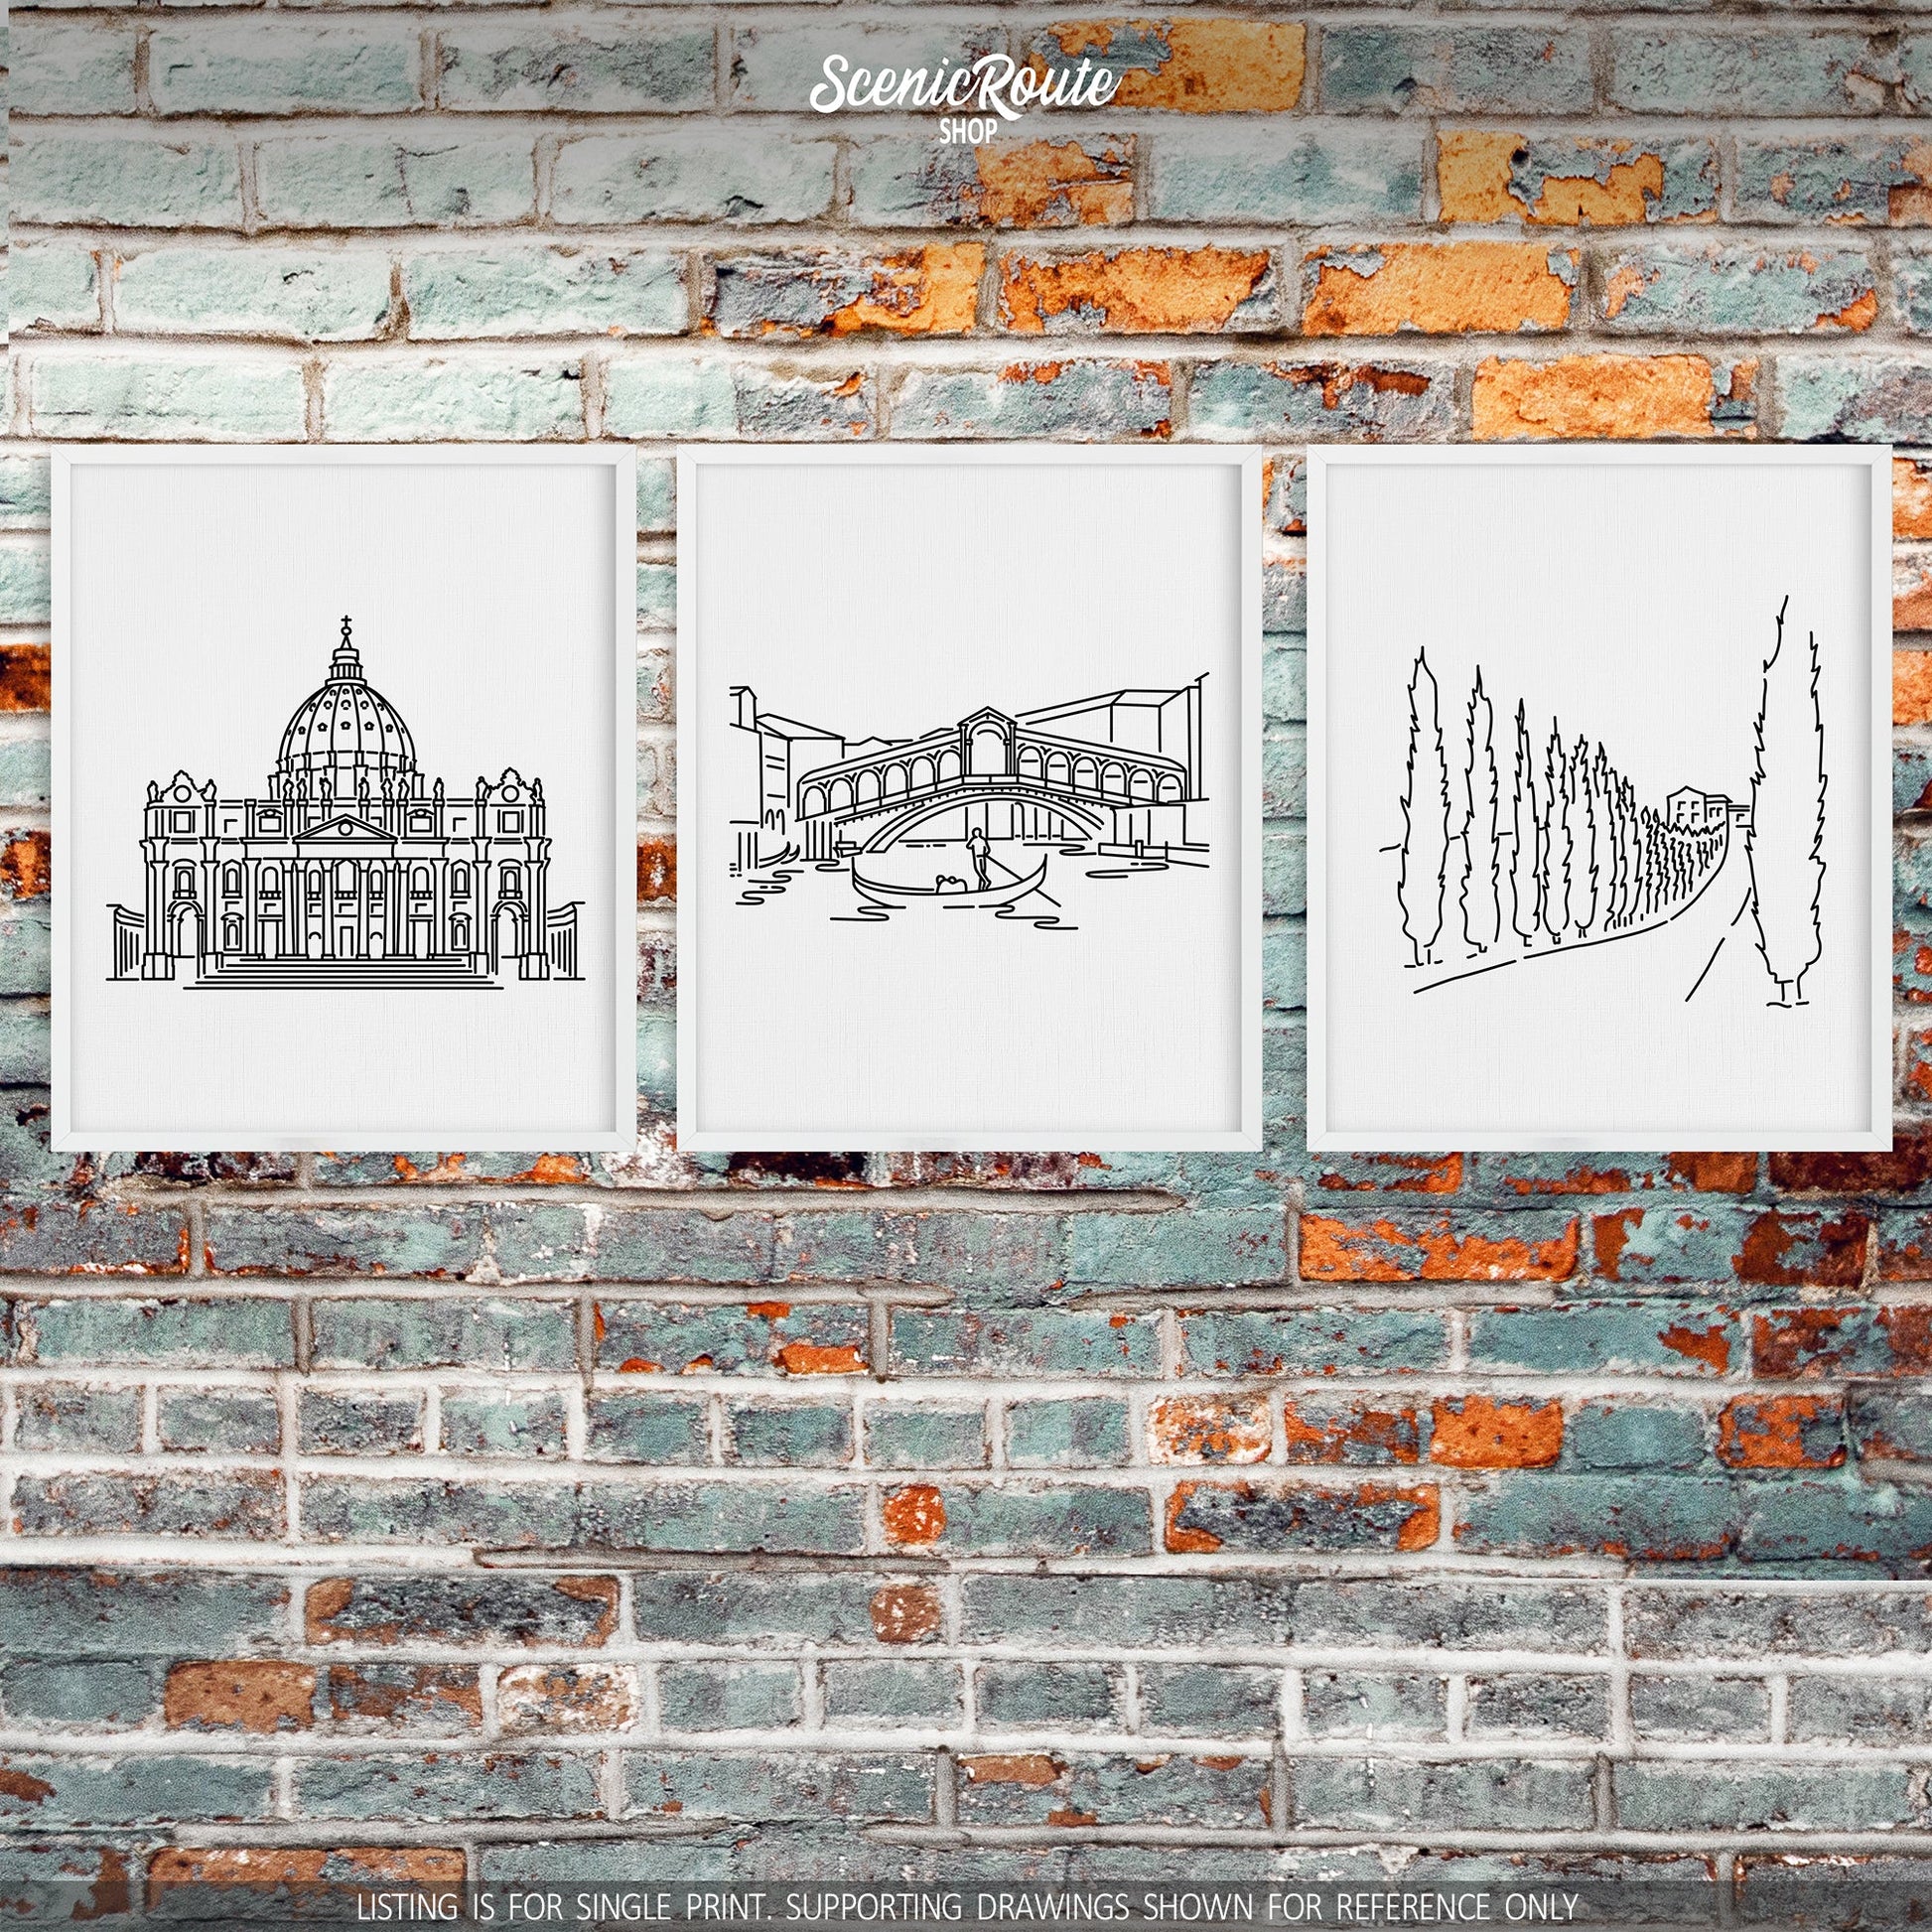 A group of three framed drawings on a brick wall. The line art drawings include Saint Peters Basilica, the Rialto Bridge, and a Tuscany Drive